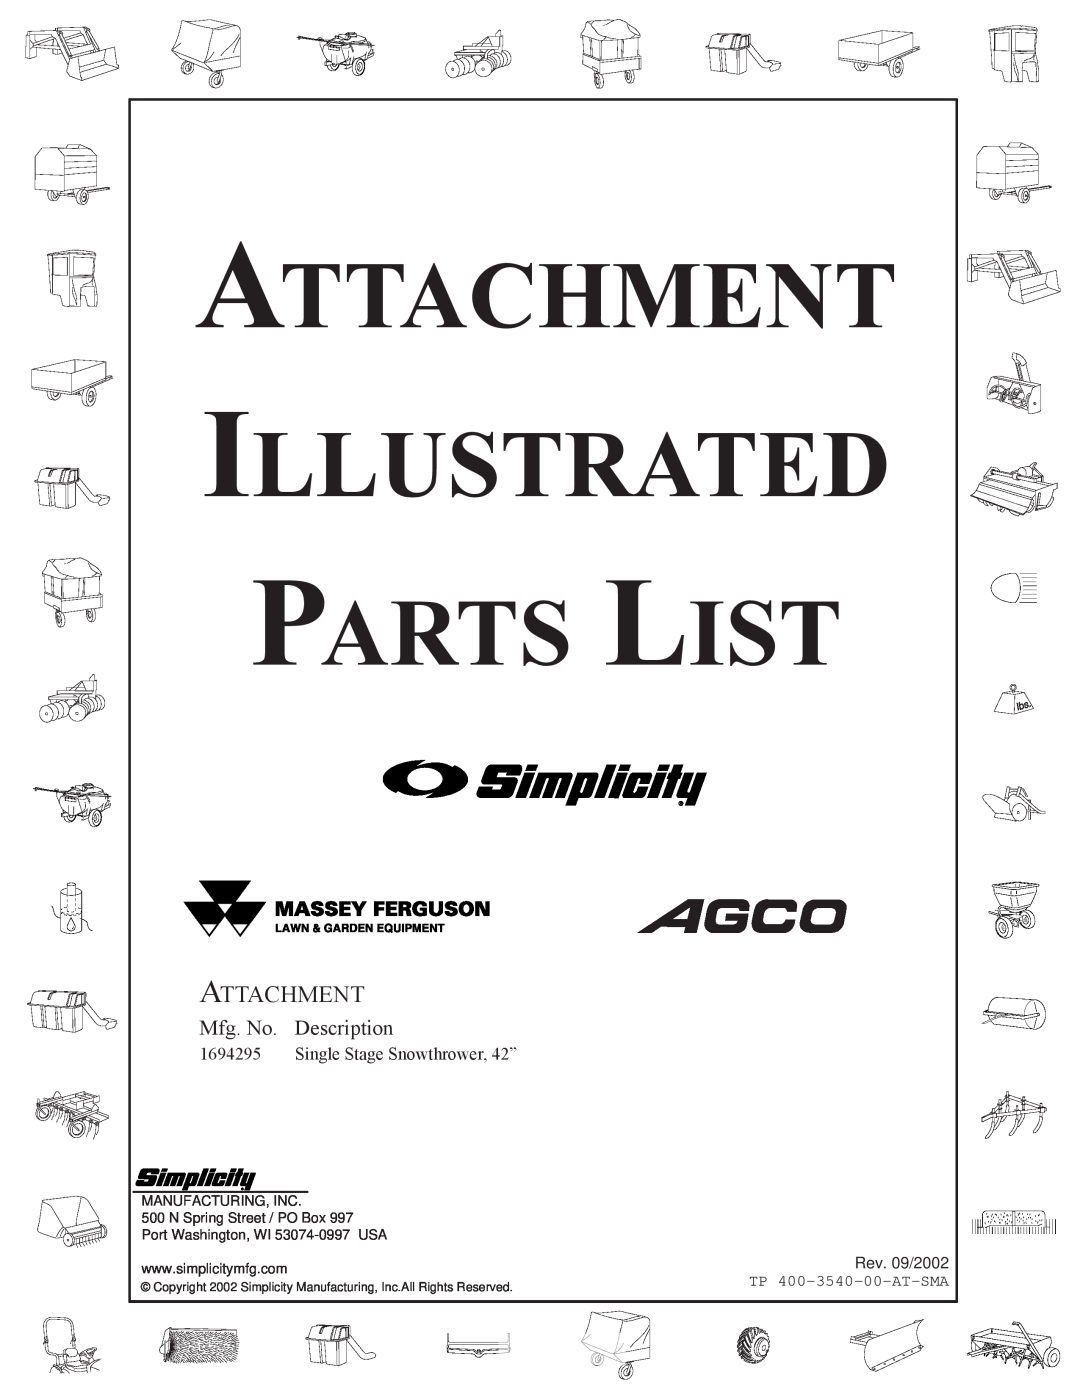 Snapper 3540 manual Attachment Illustrated Parts List, Mfg. No. Description, Single Stage Snowthrower, 42”, Rev. 09/2002 